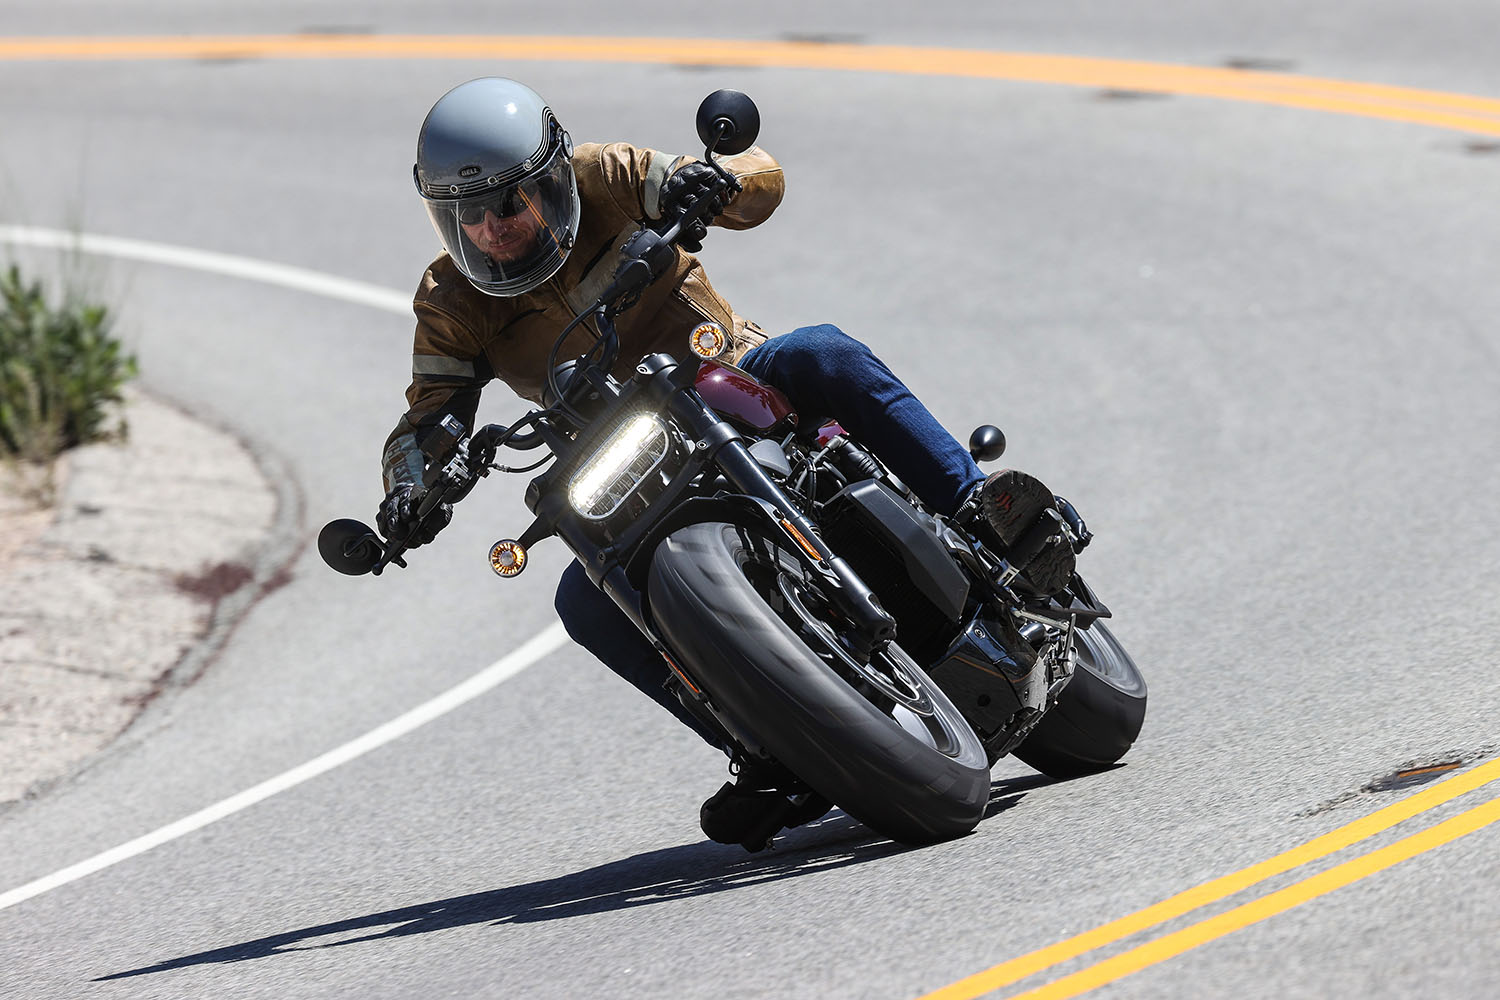 2021 Harley-Davidson Sportster S First Look (14 Fast Facts)